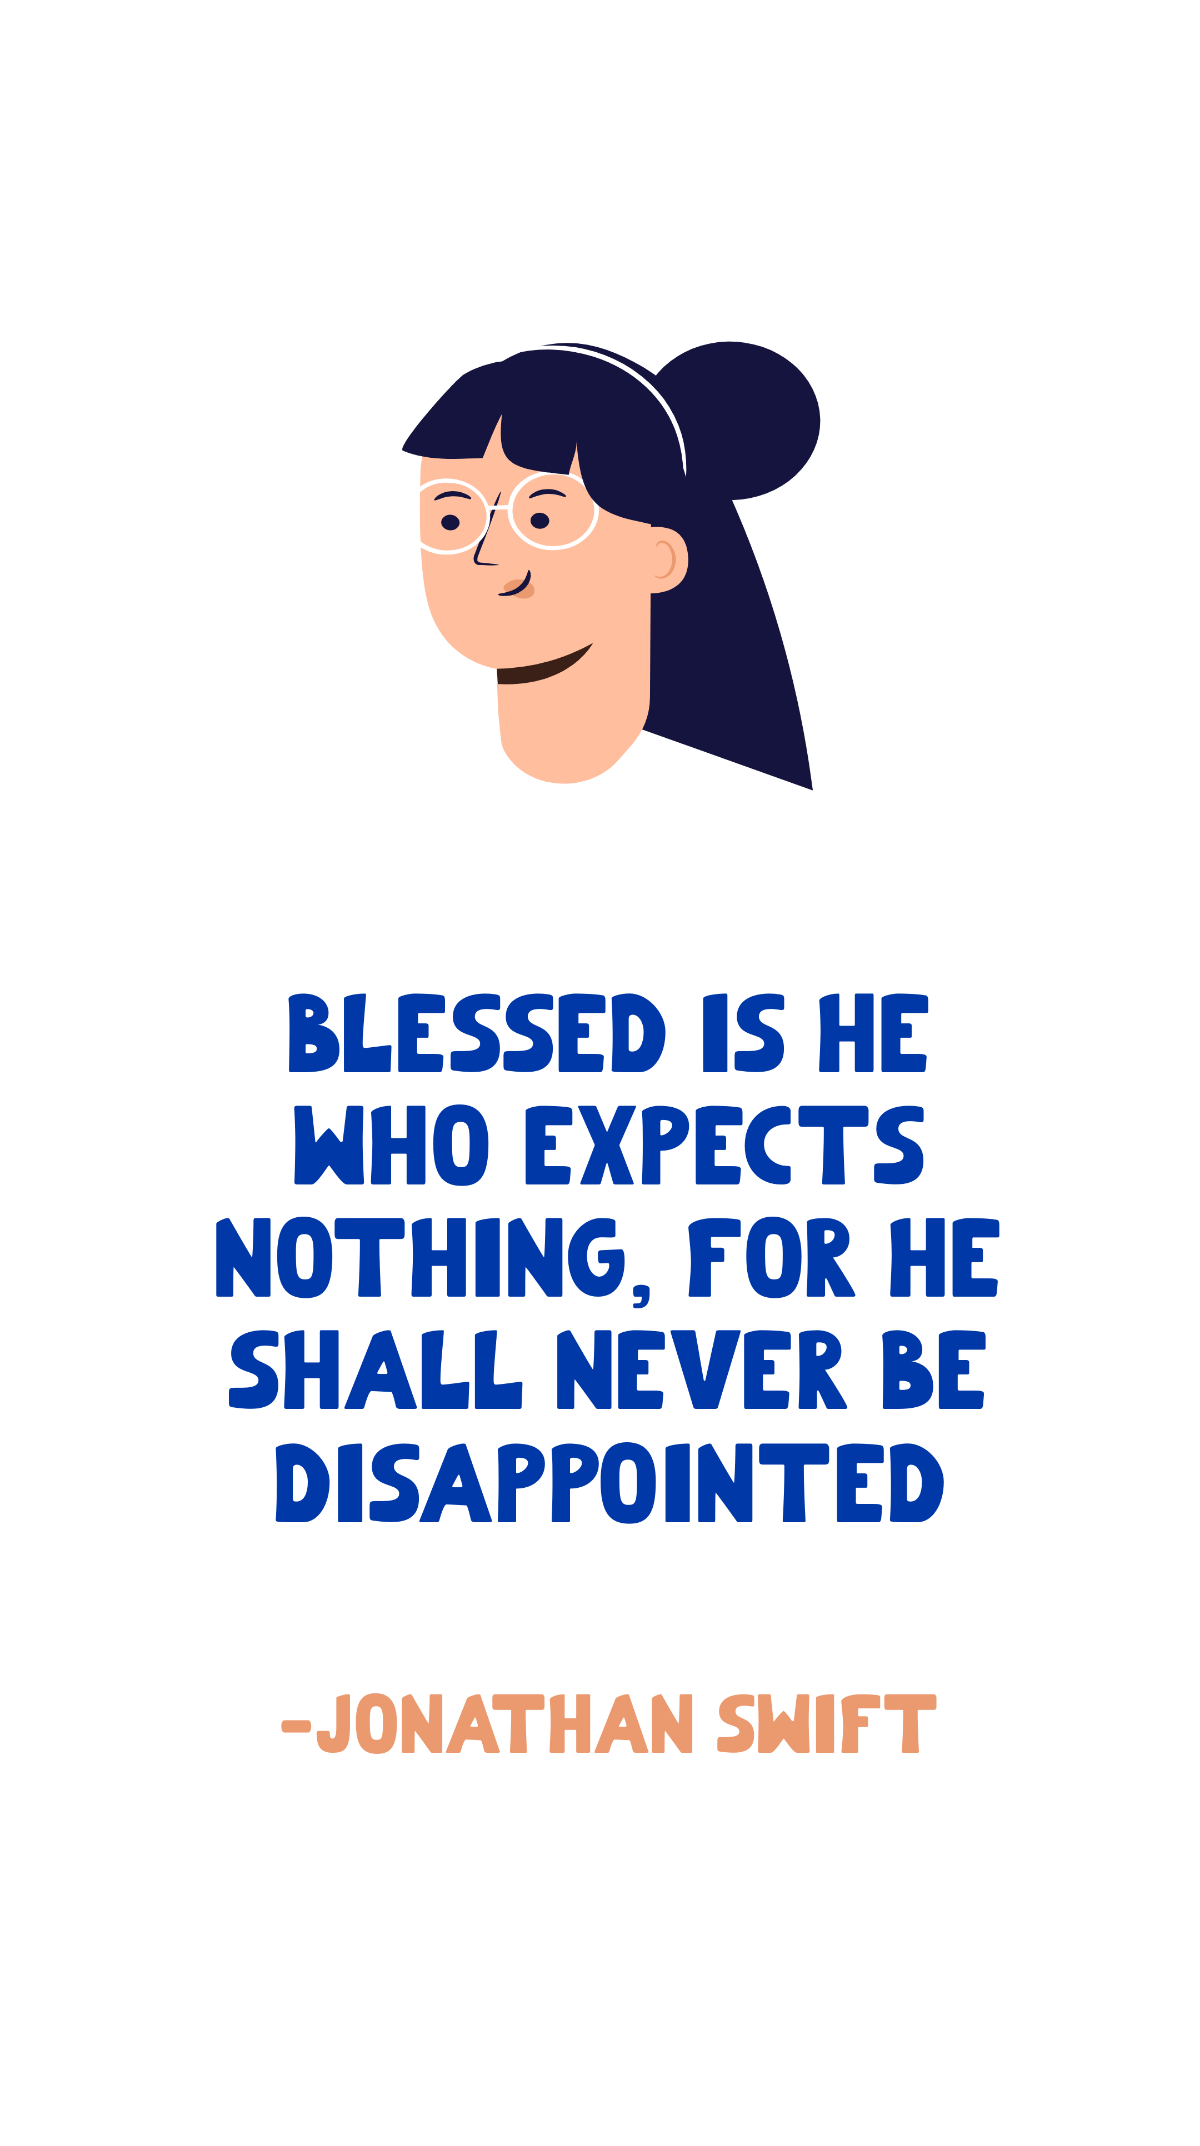 Free Jonathan Swift - Blessed is he who expects nothing, for he shall never be disappointed Template